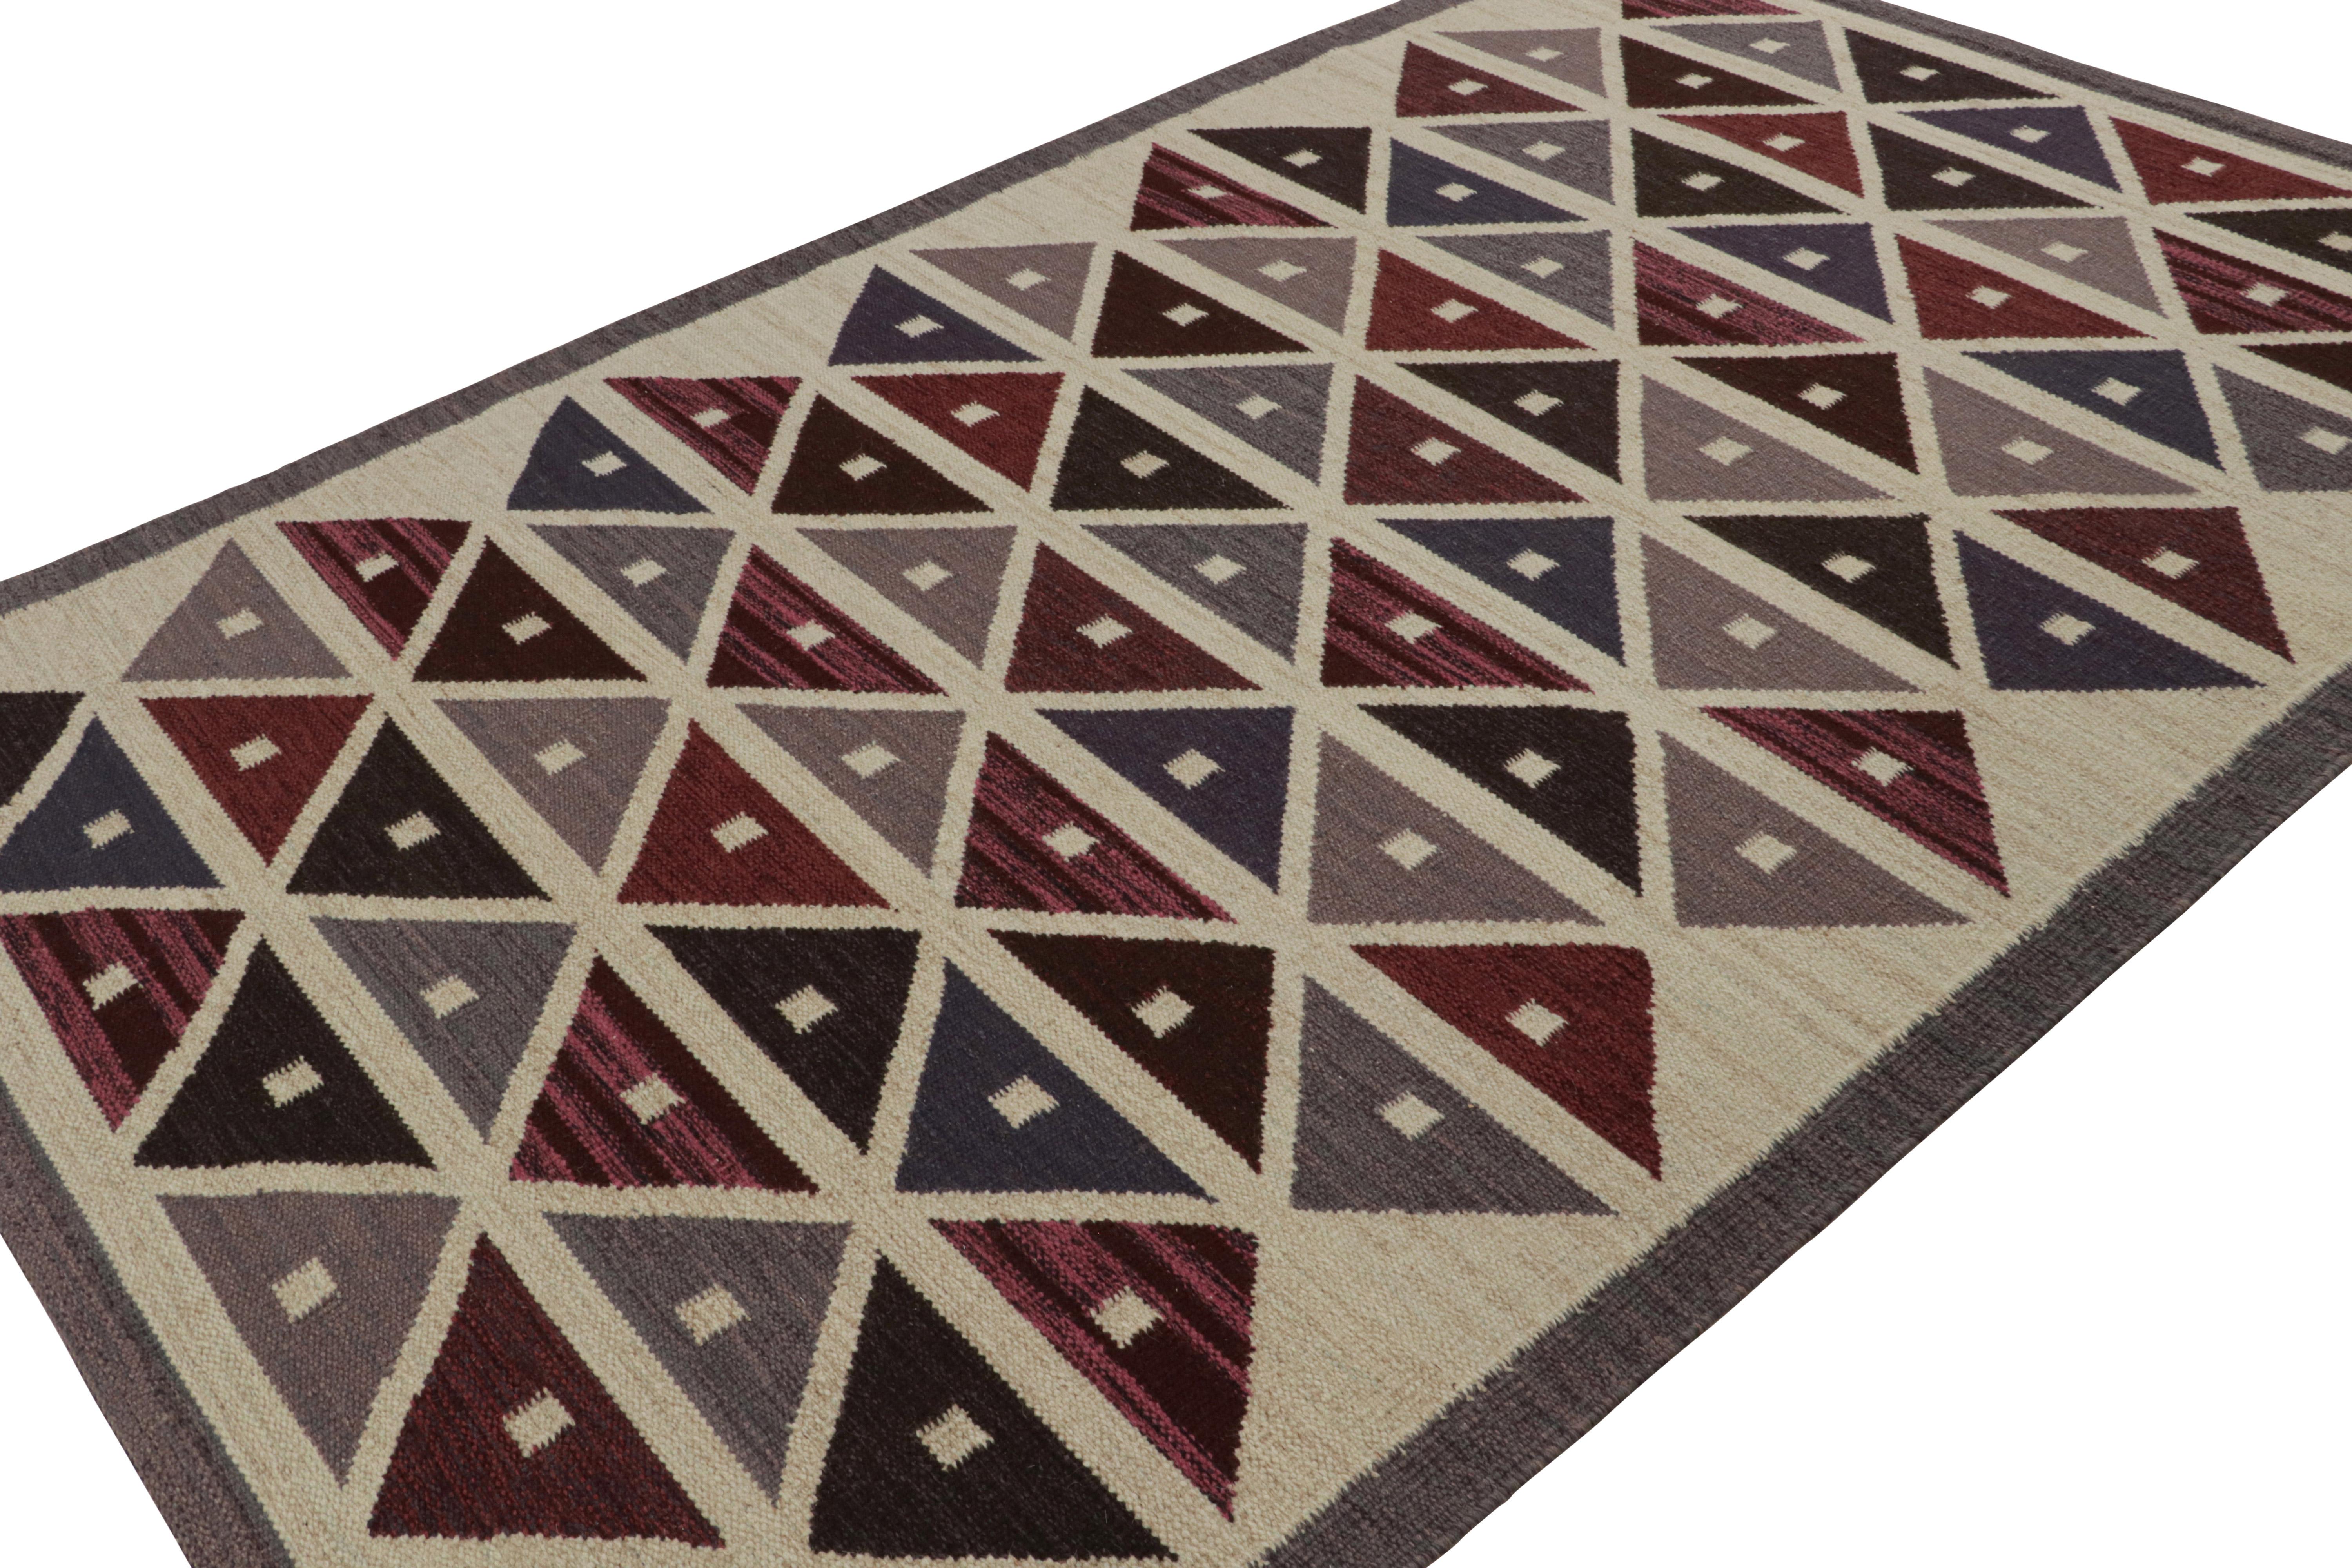 This 6x10 Kilim rug is from the flatweave line in the Scandinavian rug collection by Rug & Kilim. Handwoven in wool, cotton and natural yarns, its design is a modern take on Rollakhan and Rya rugs in the Swedish Deco style. 

On the design: